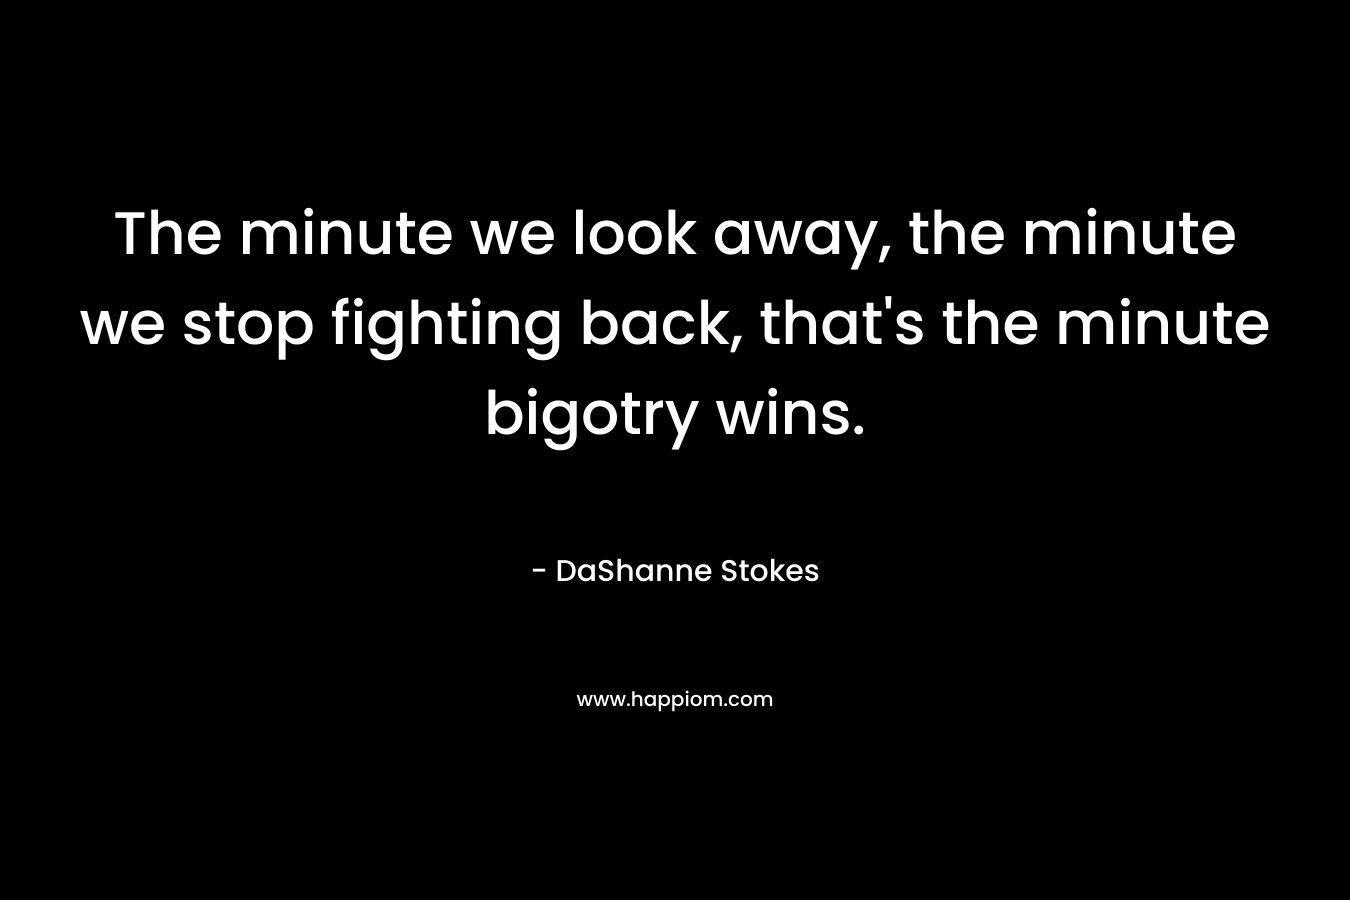 The minute we look away, the minute we stop fighting back, that's the minute bigotry wins.